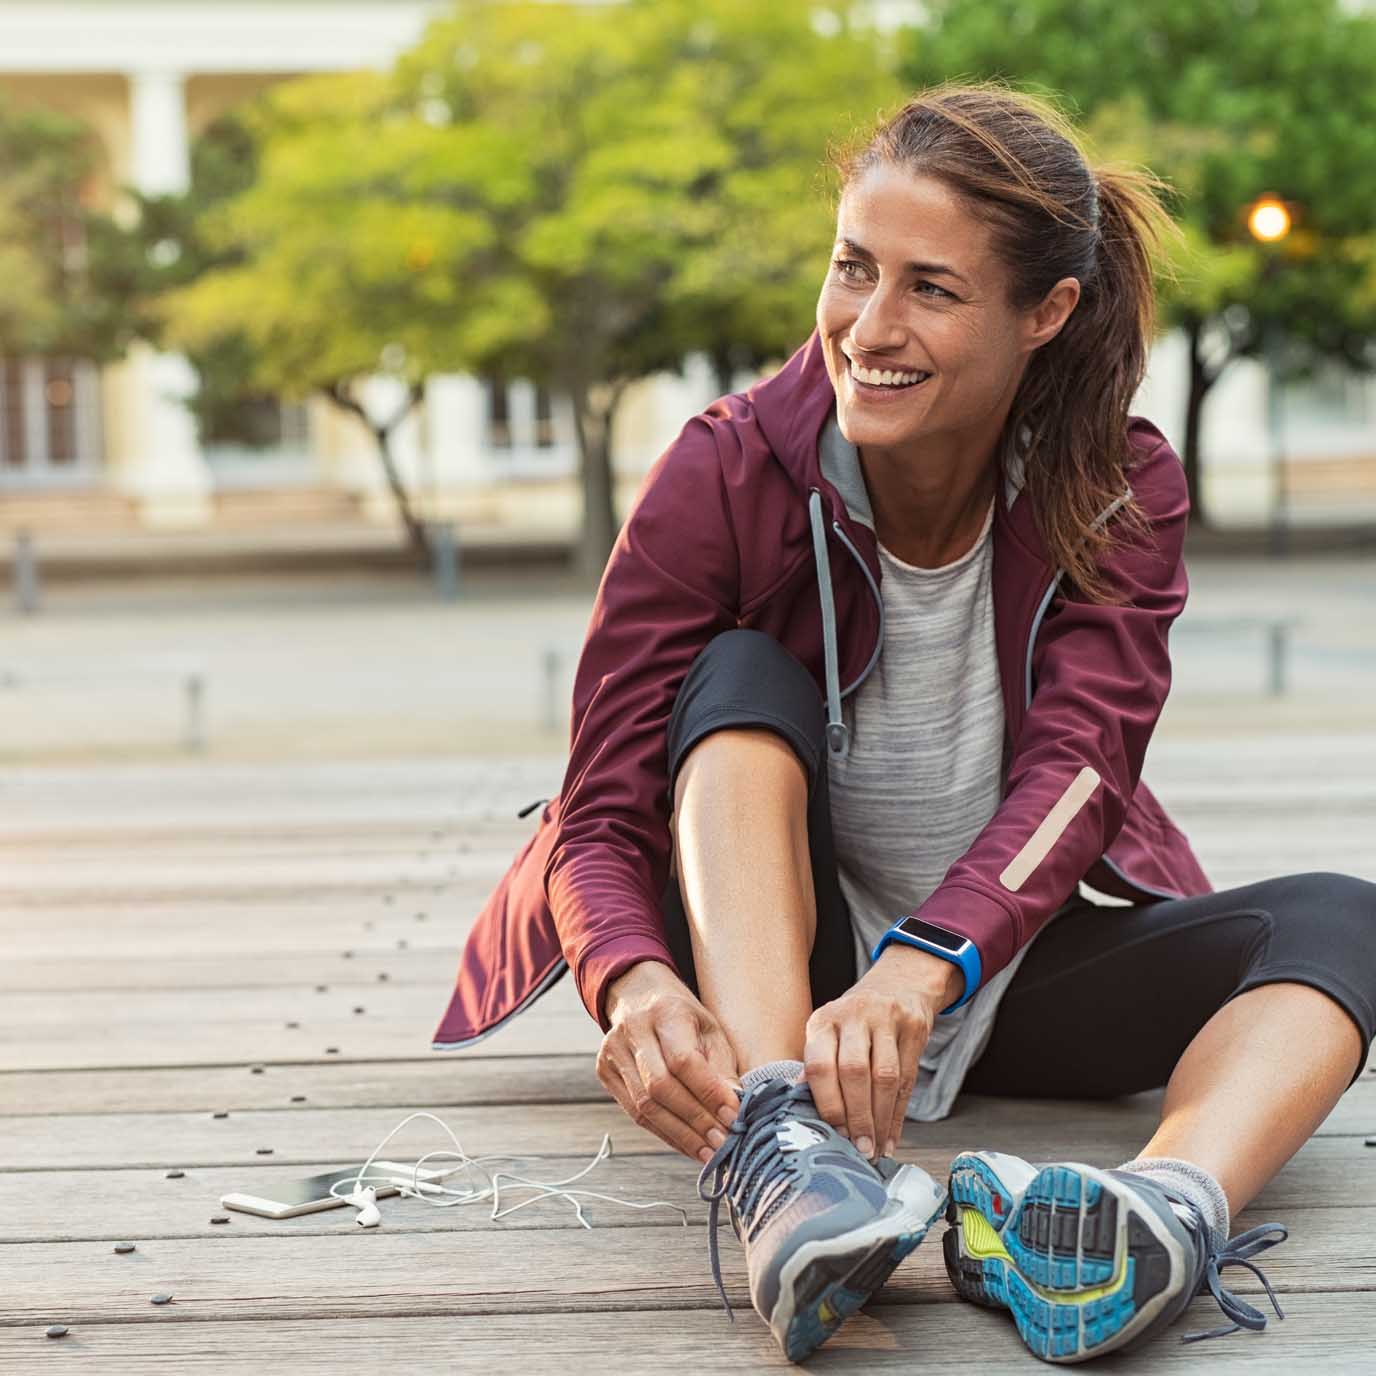 Read about the positive effect that running can have on your hormones